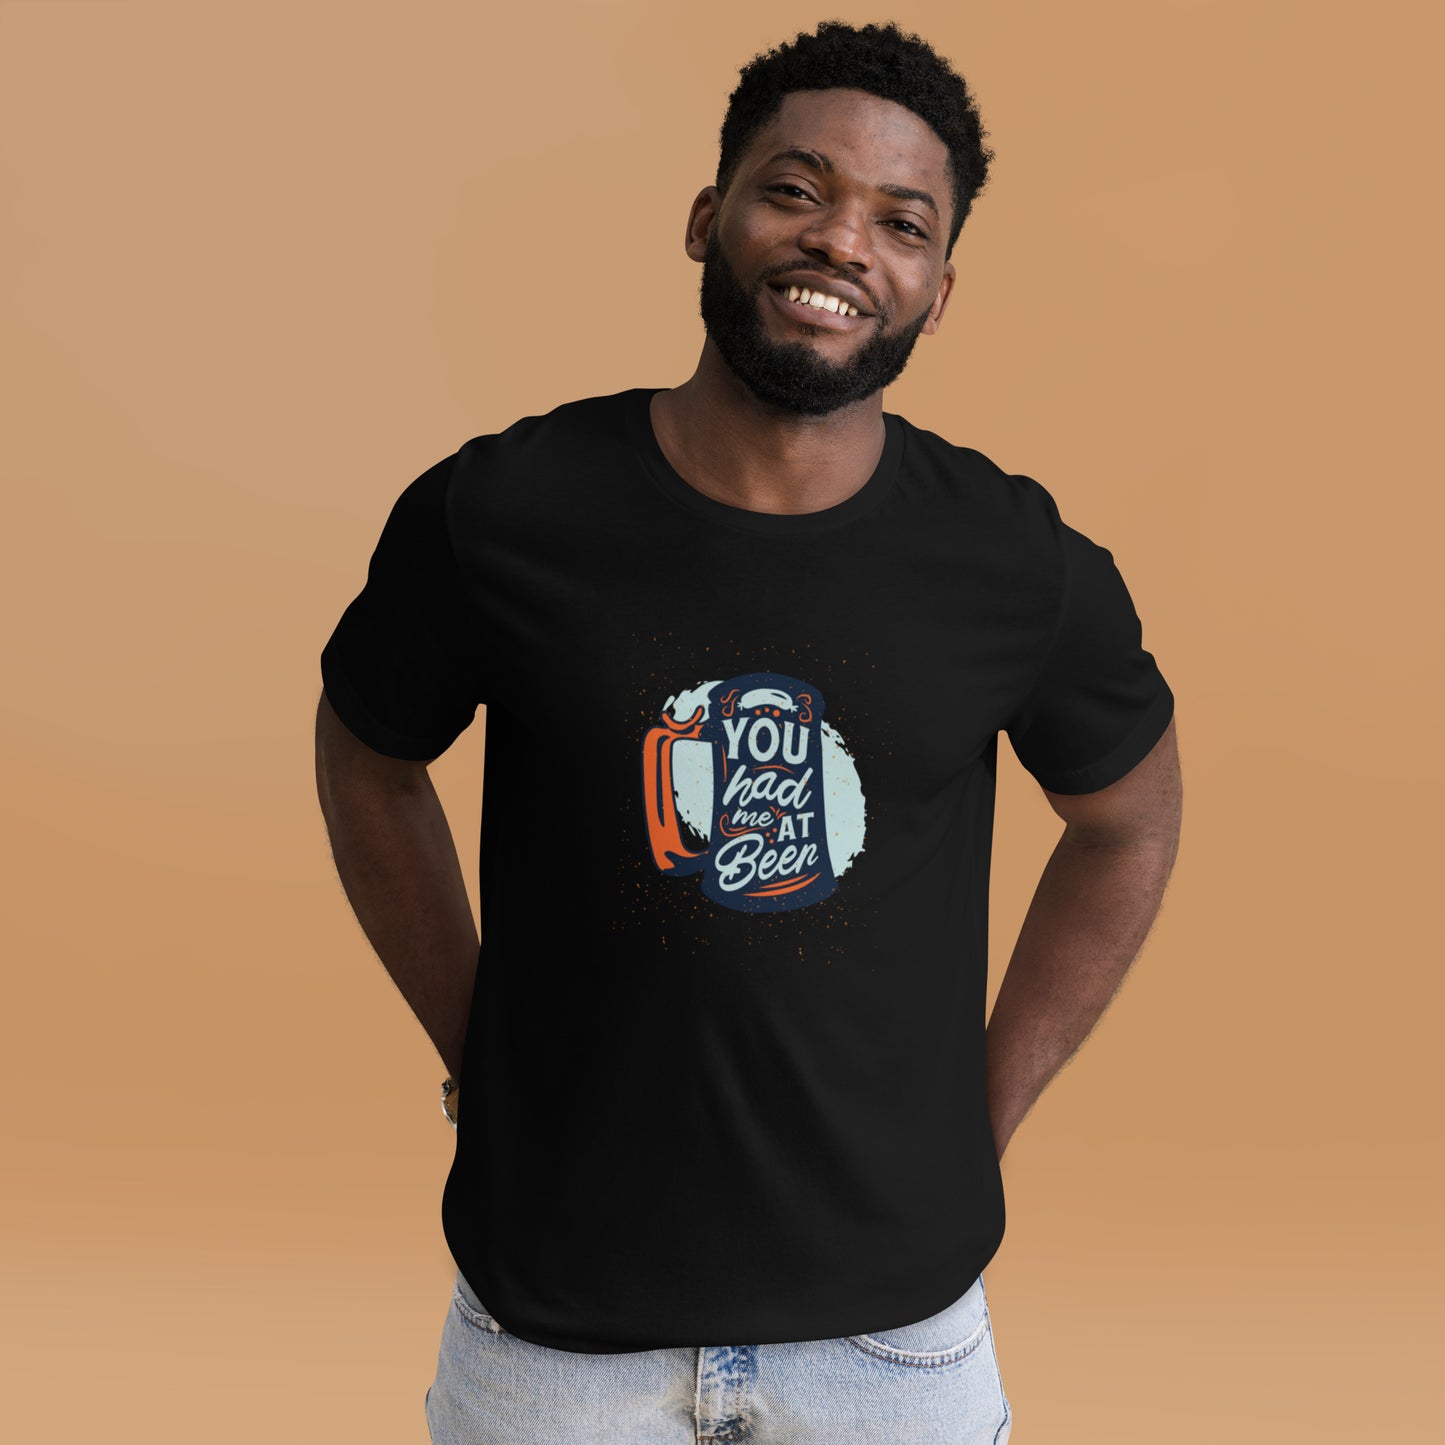 You had me at Beer Unisex t-shirt